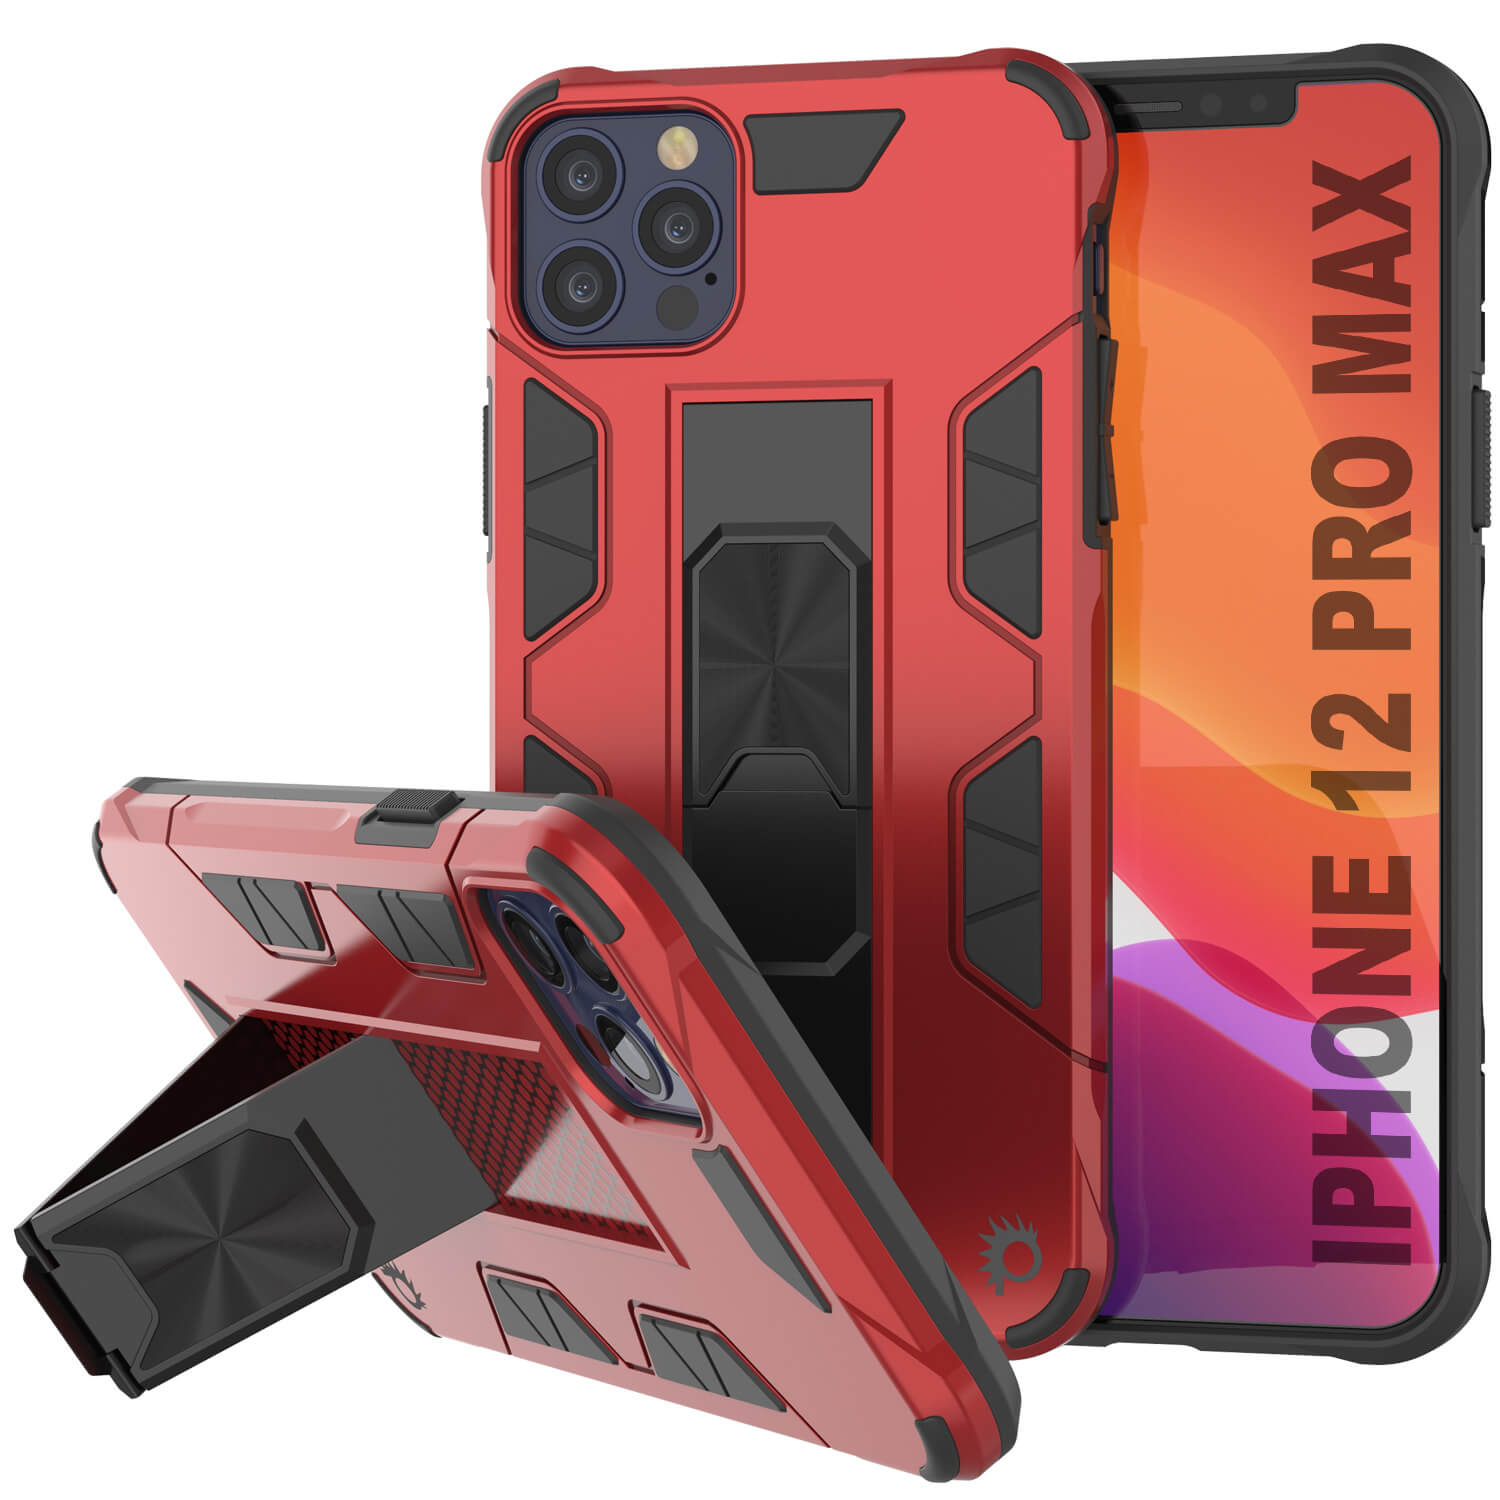  ZHEGAILIAN Case Compatible with iPhone 12 Pro Max Case,Red Lip  Bite Bullet Case,Tempered Glass Back+Soft Silicone TPU Shock Protective Case  for iPhone 12 Pro Max Case. : Cell Phones & Accessories